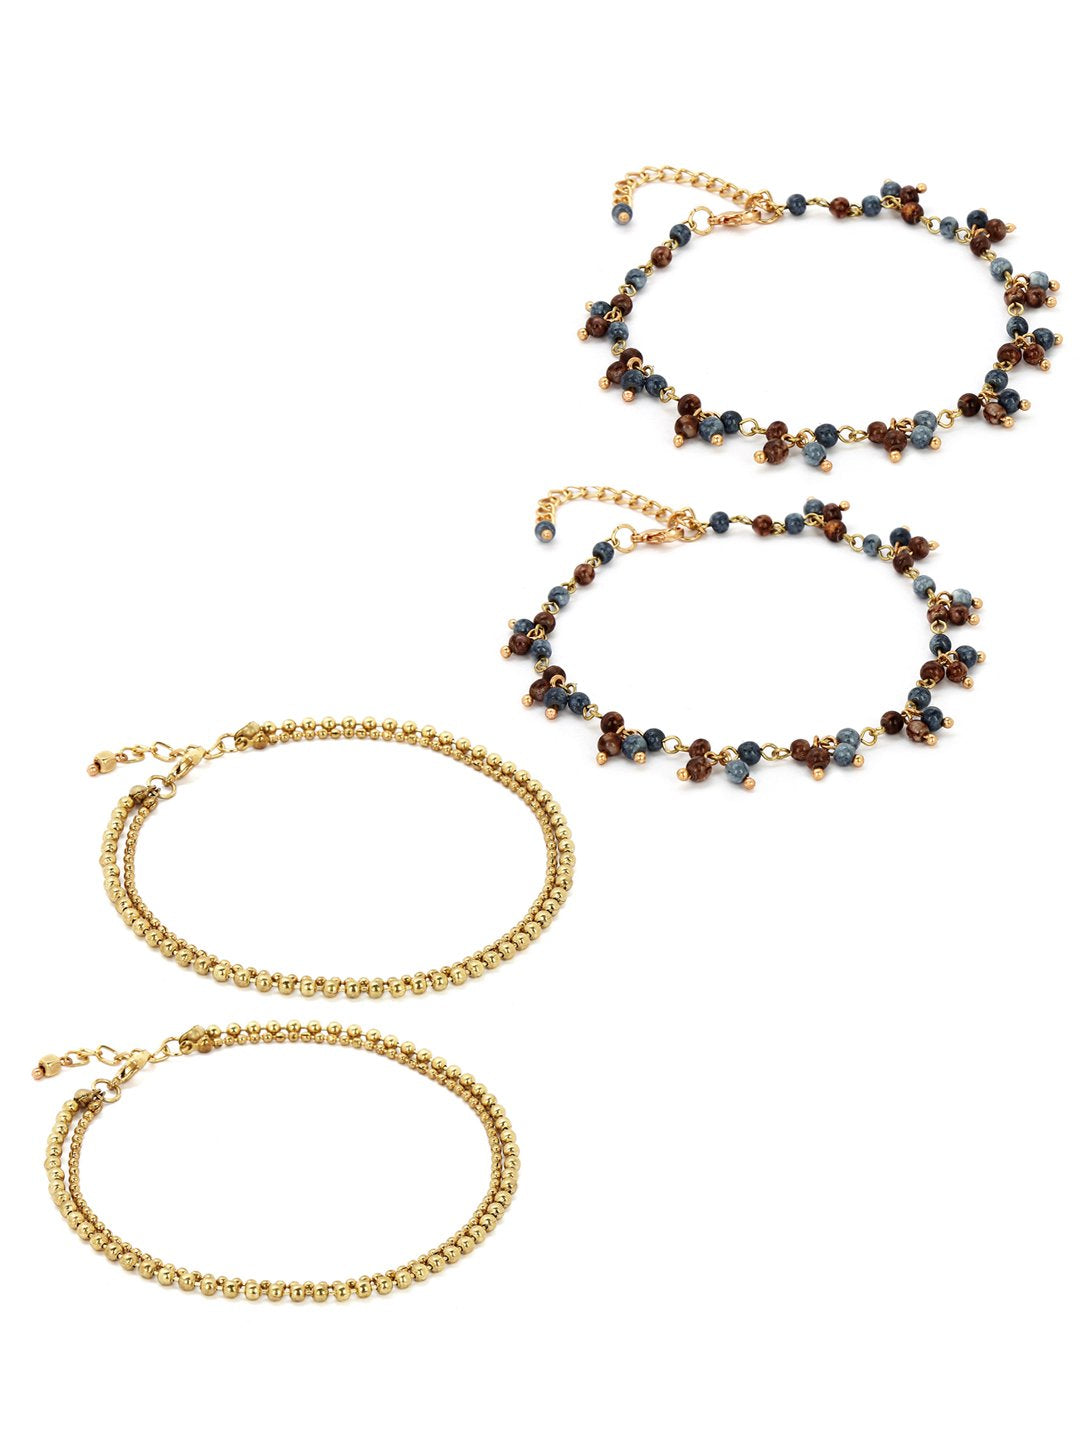 Set of 4 antique gold toned beaded anklets